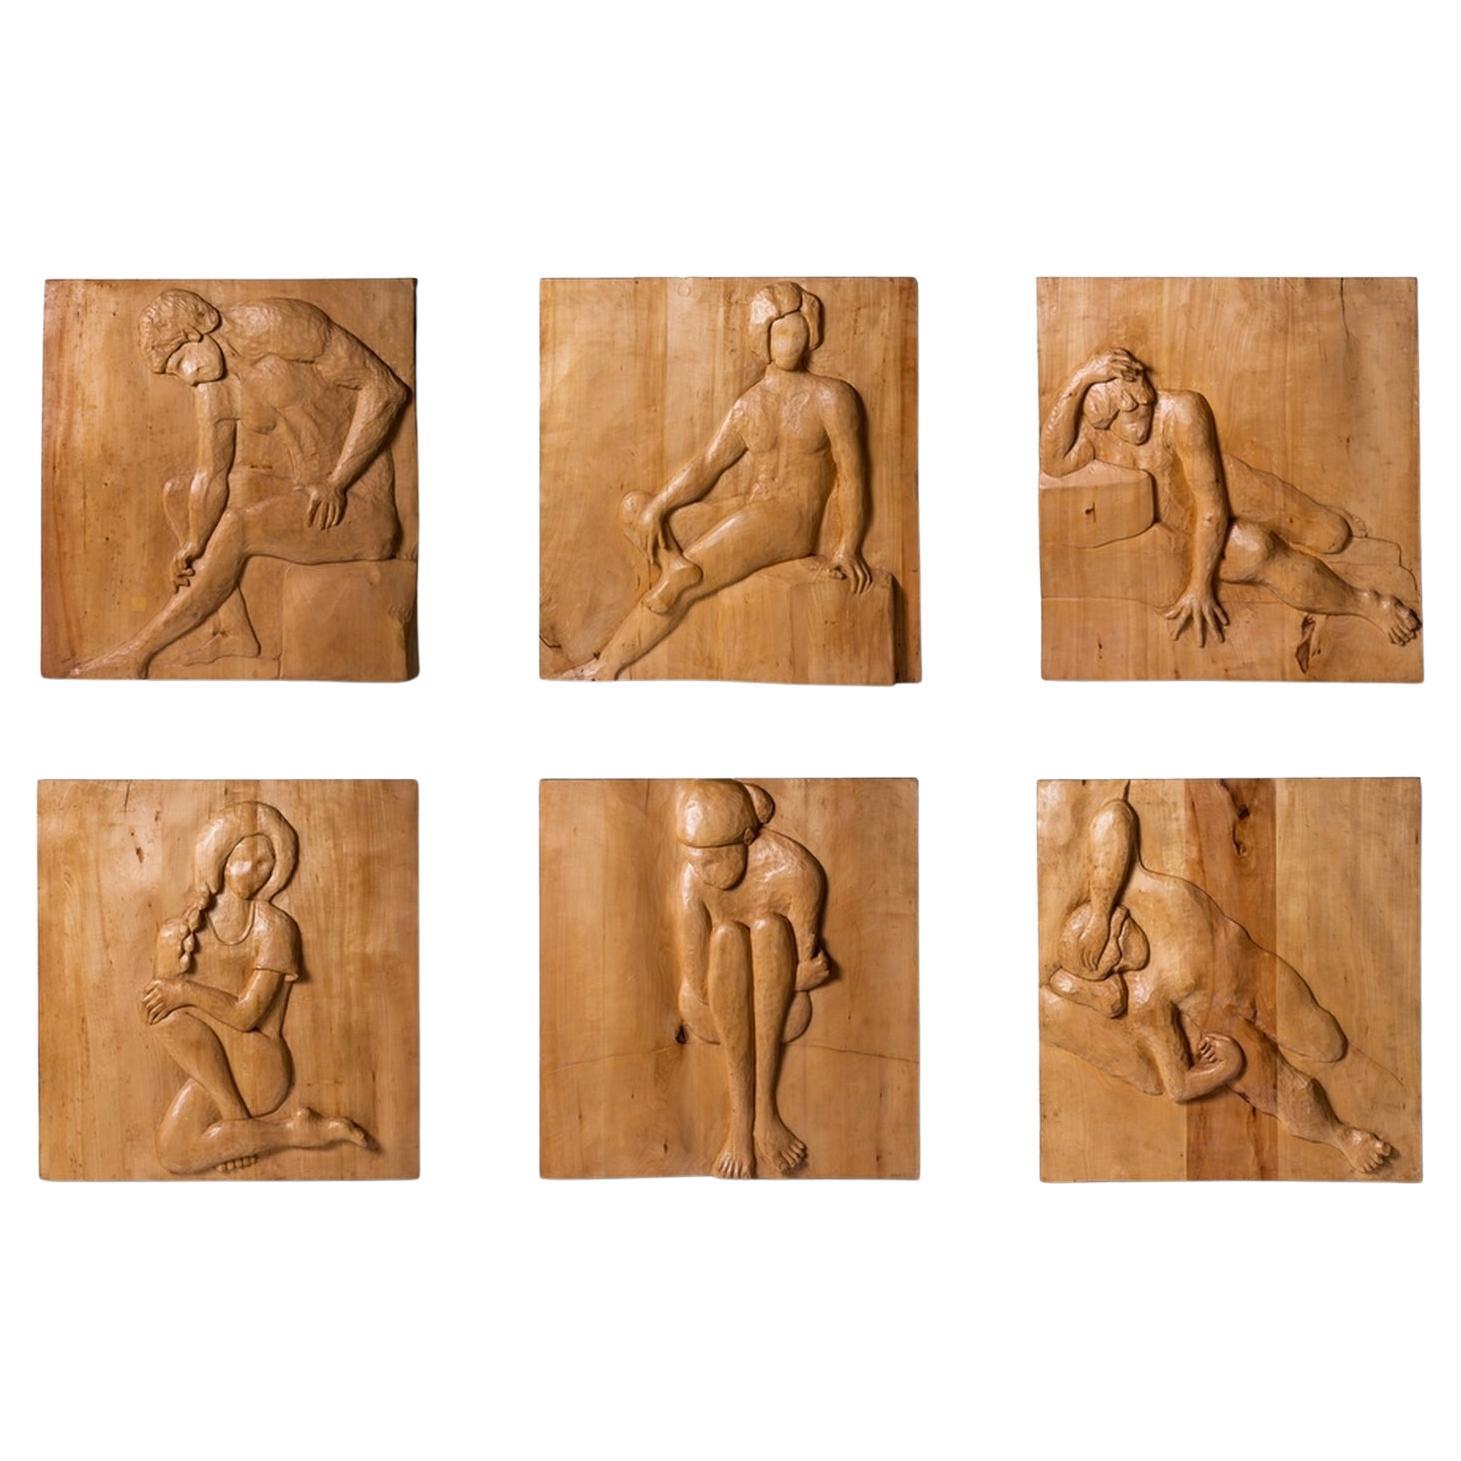 Six Decorative Panels, Carved Wood in Low Relief